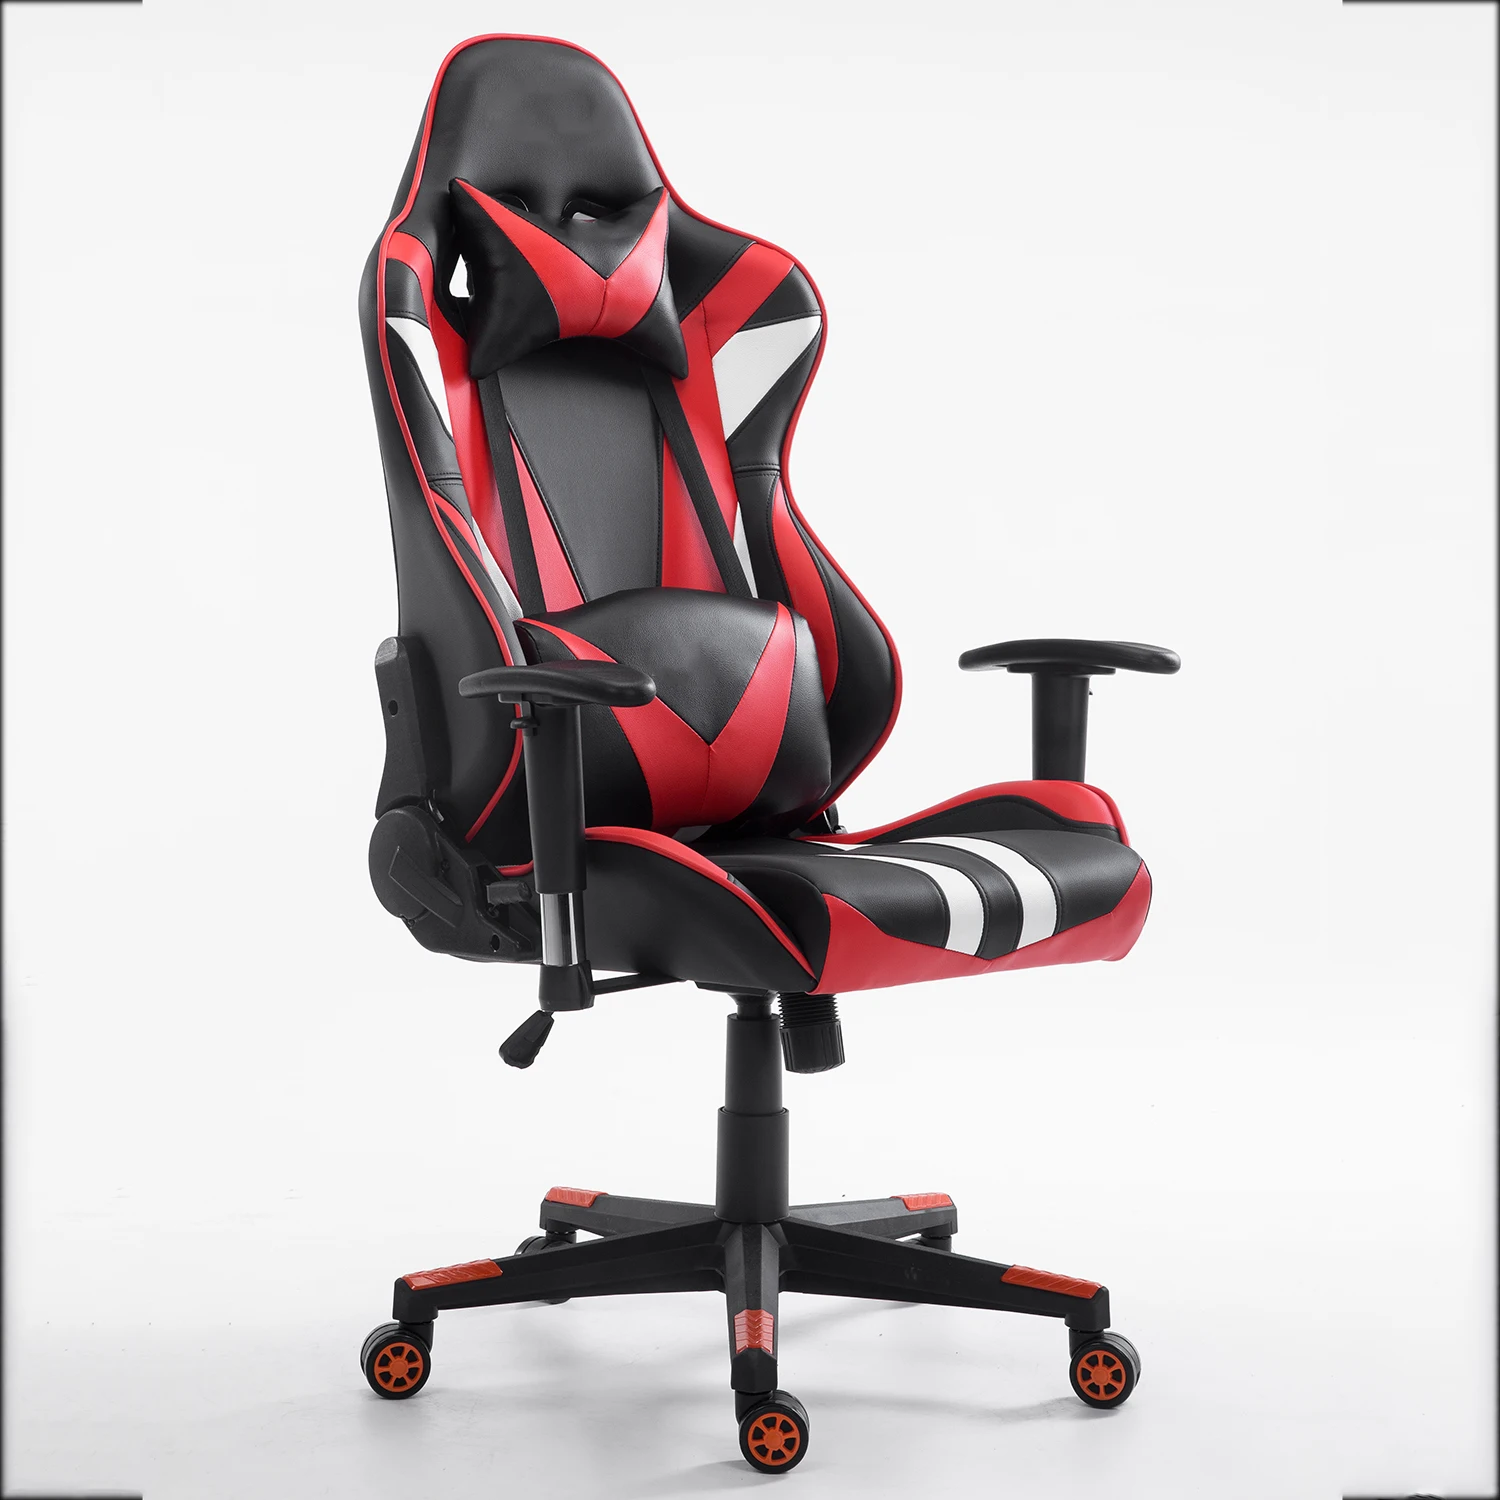 Germany Modern Office Furniture Bester Gaming Stuhl Racing Bester Gaming Racer Racing Style Gaming Chair Office Computer Buy Racing Stuhl Bester Gaming Stuhl Racer Stuhl Product On Alibaba Com